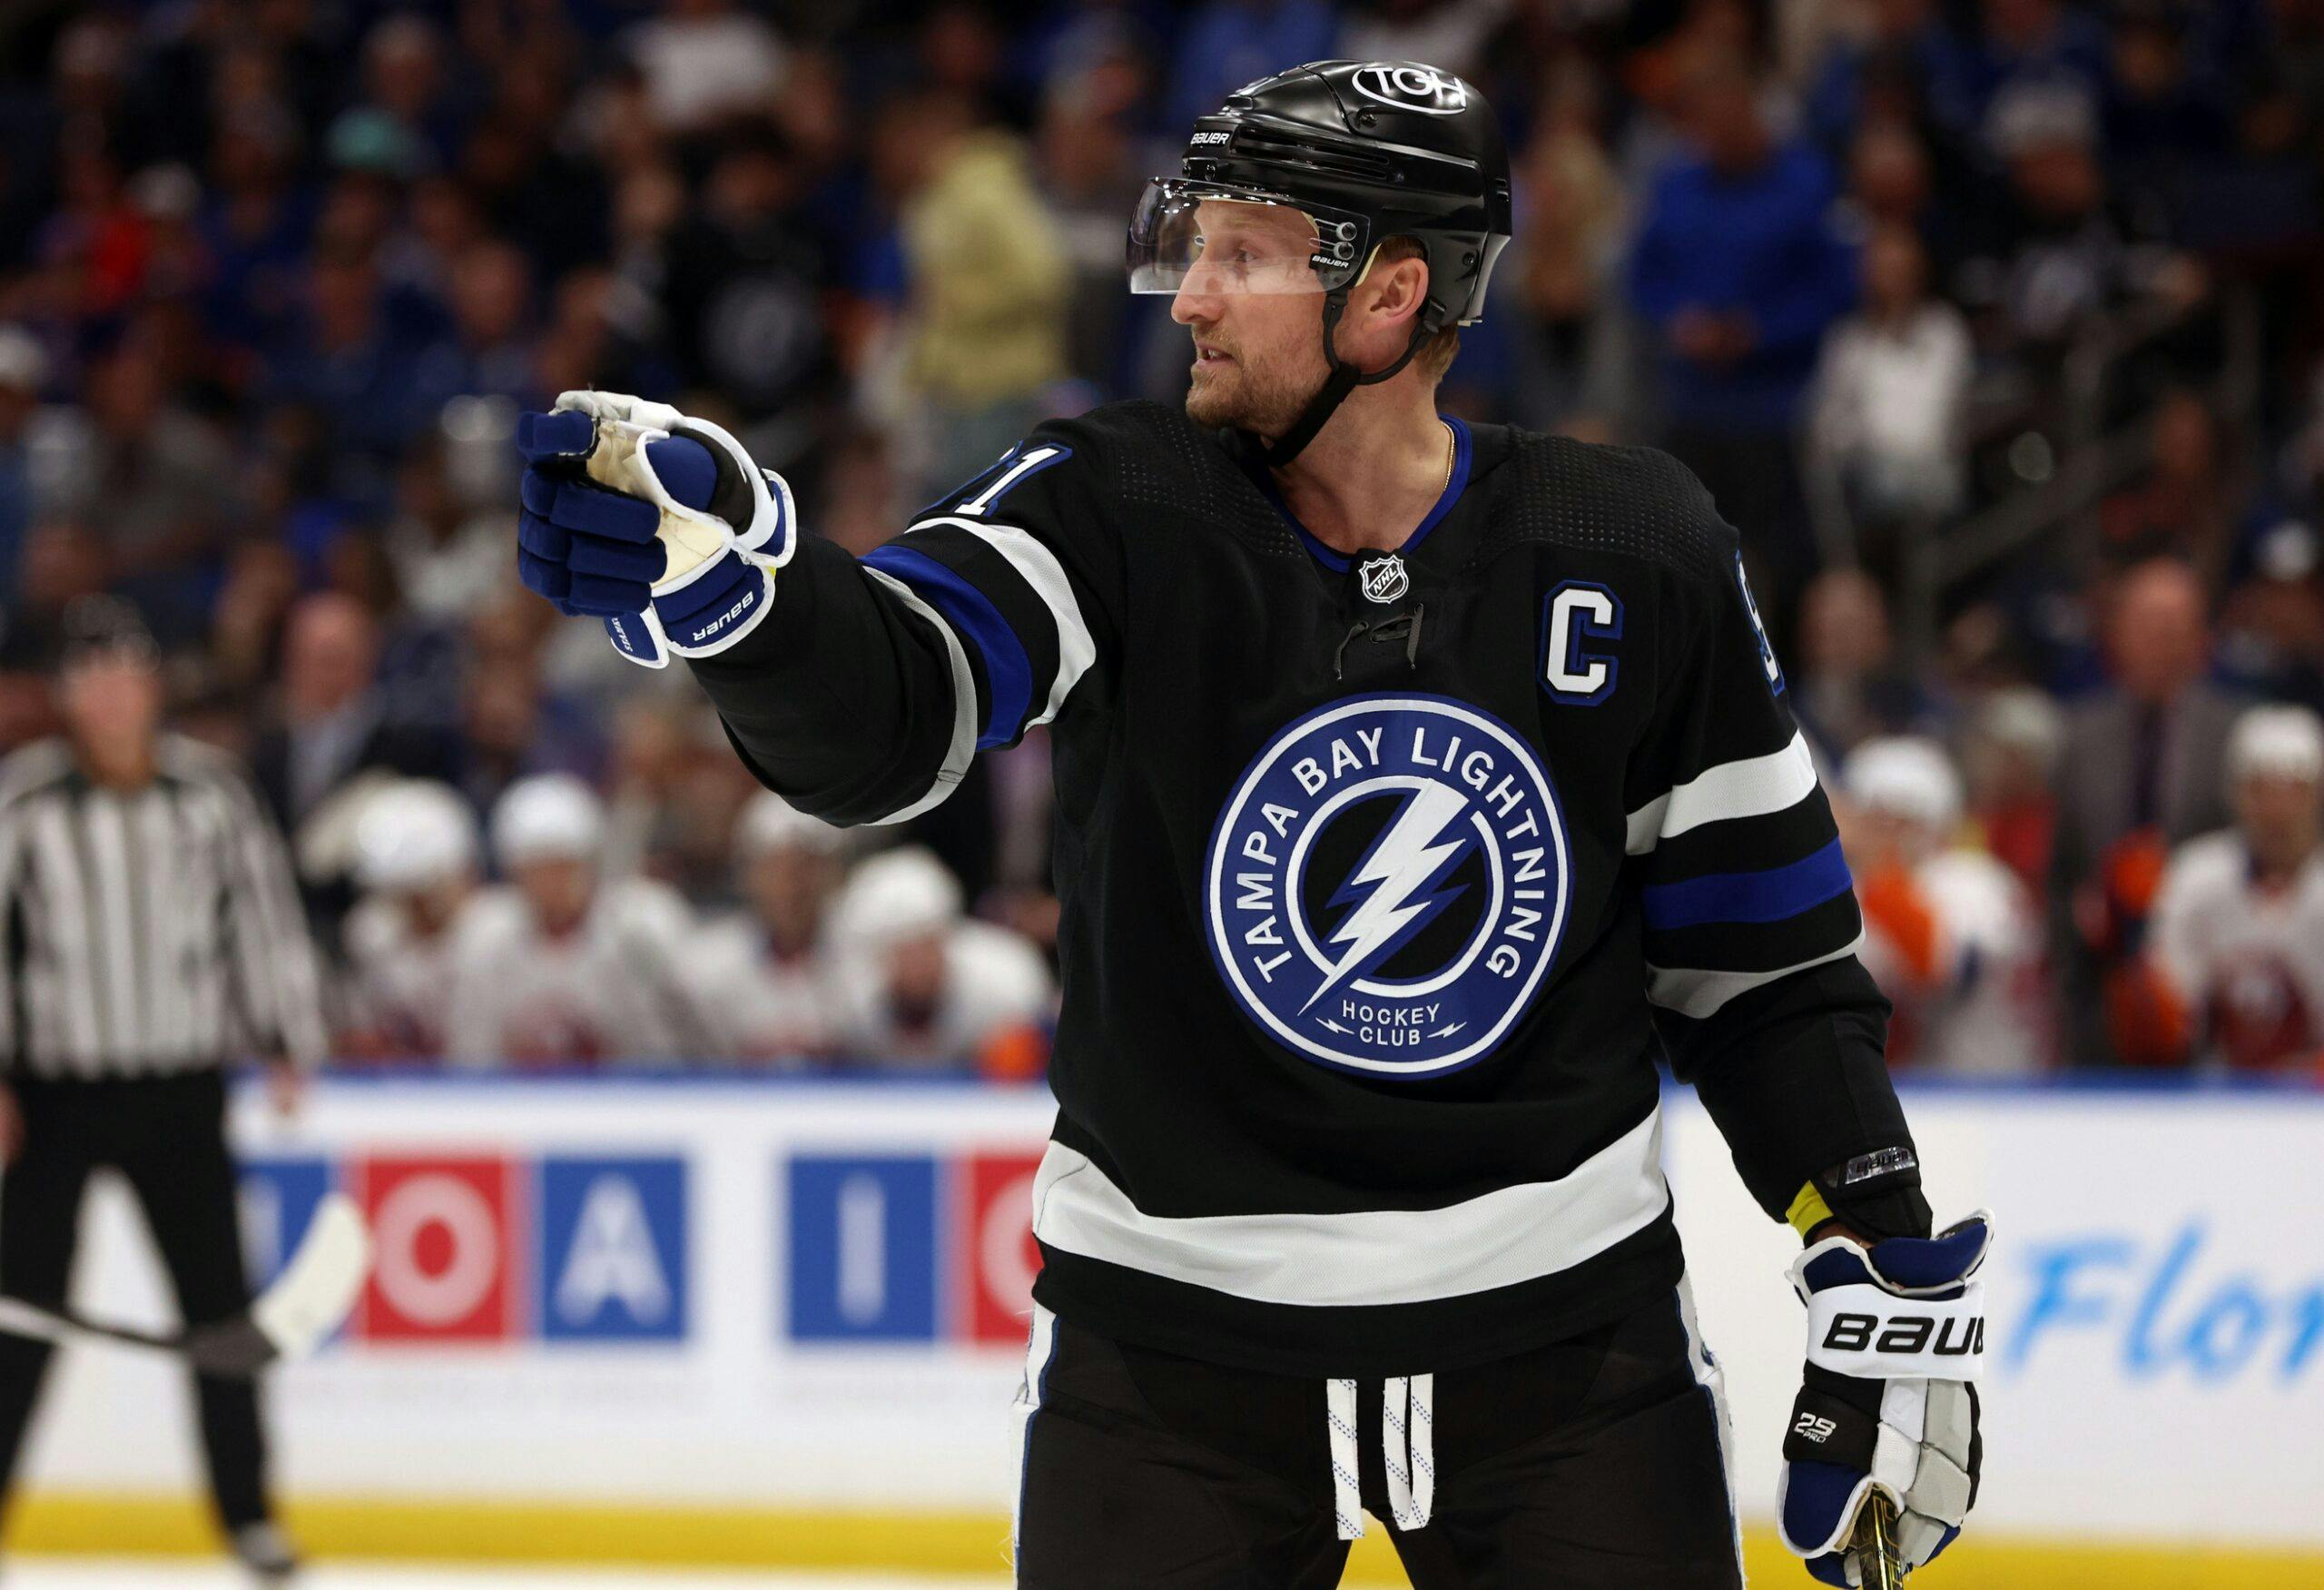 After an early playoff exit, where will Steven Stamkos play next season?